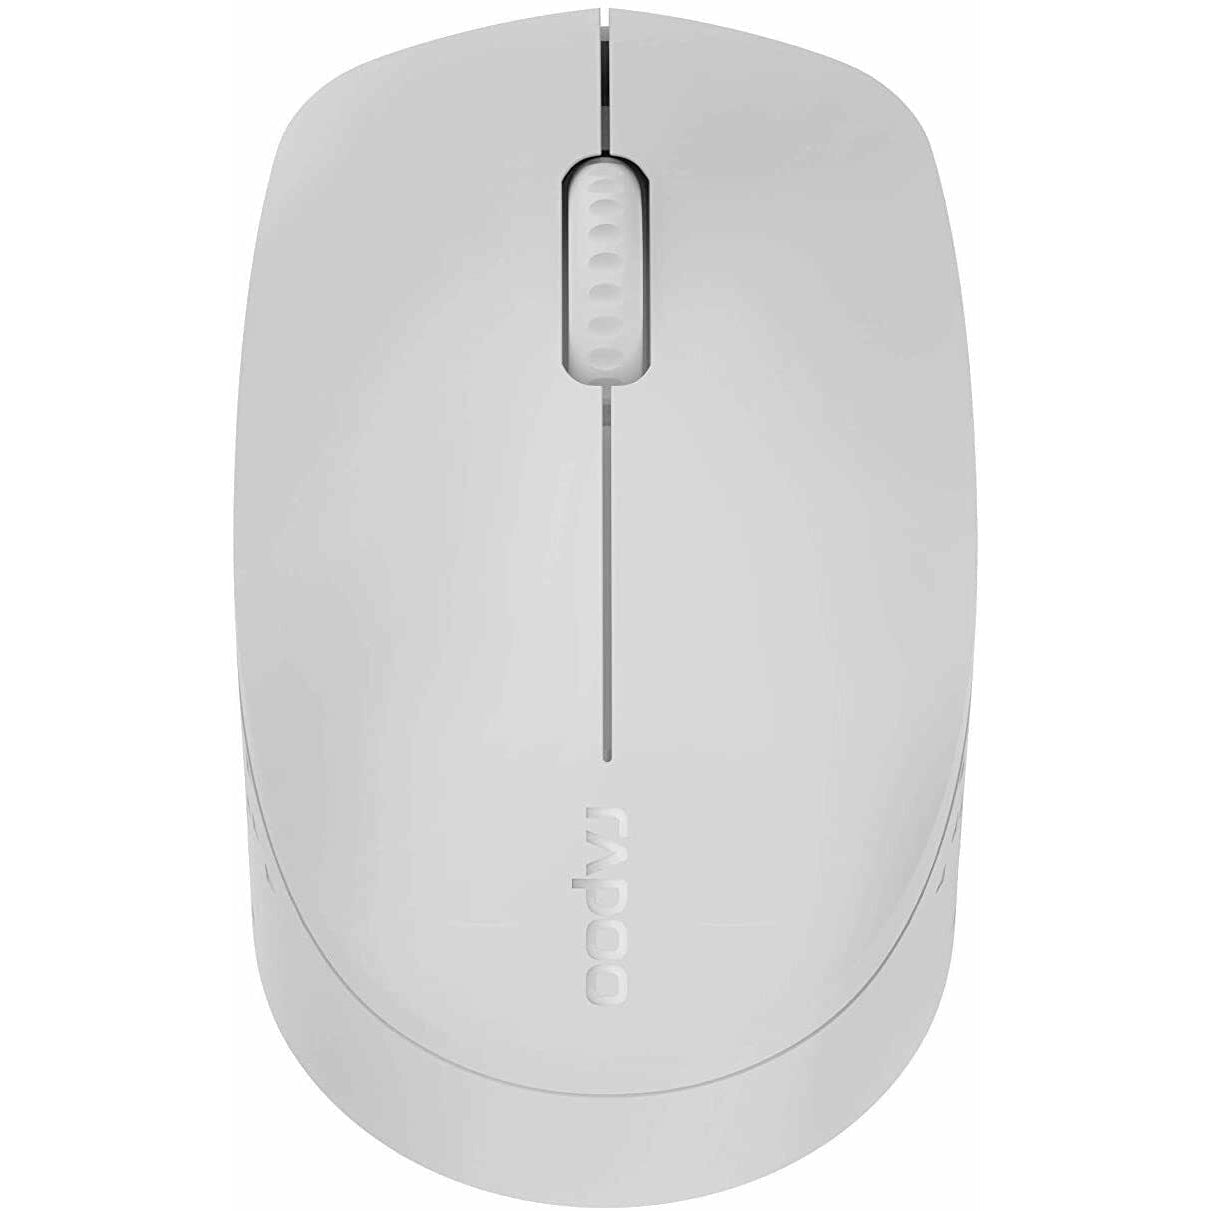 Rapoo M100 Multi-mode Wireless Silent Optical Mouse - Grey - Refurbished Excellent